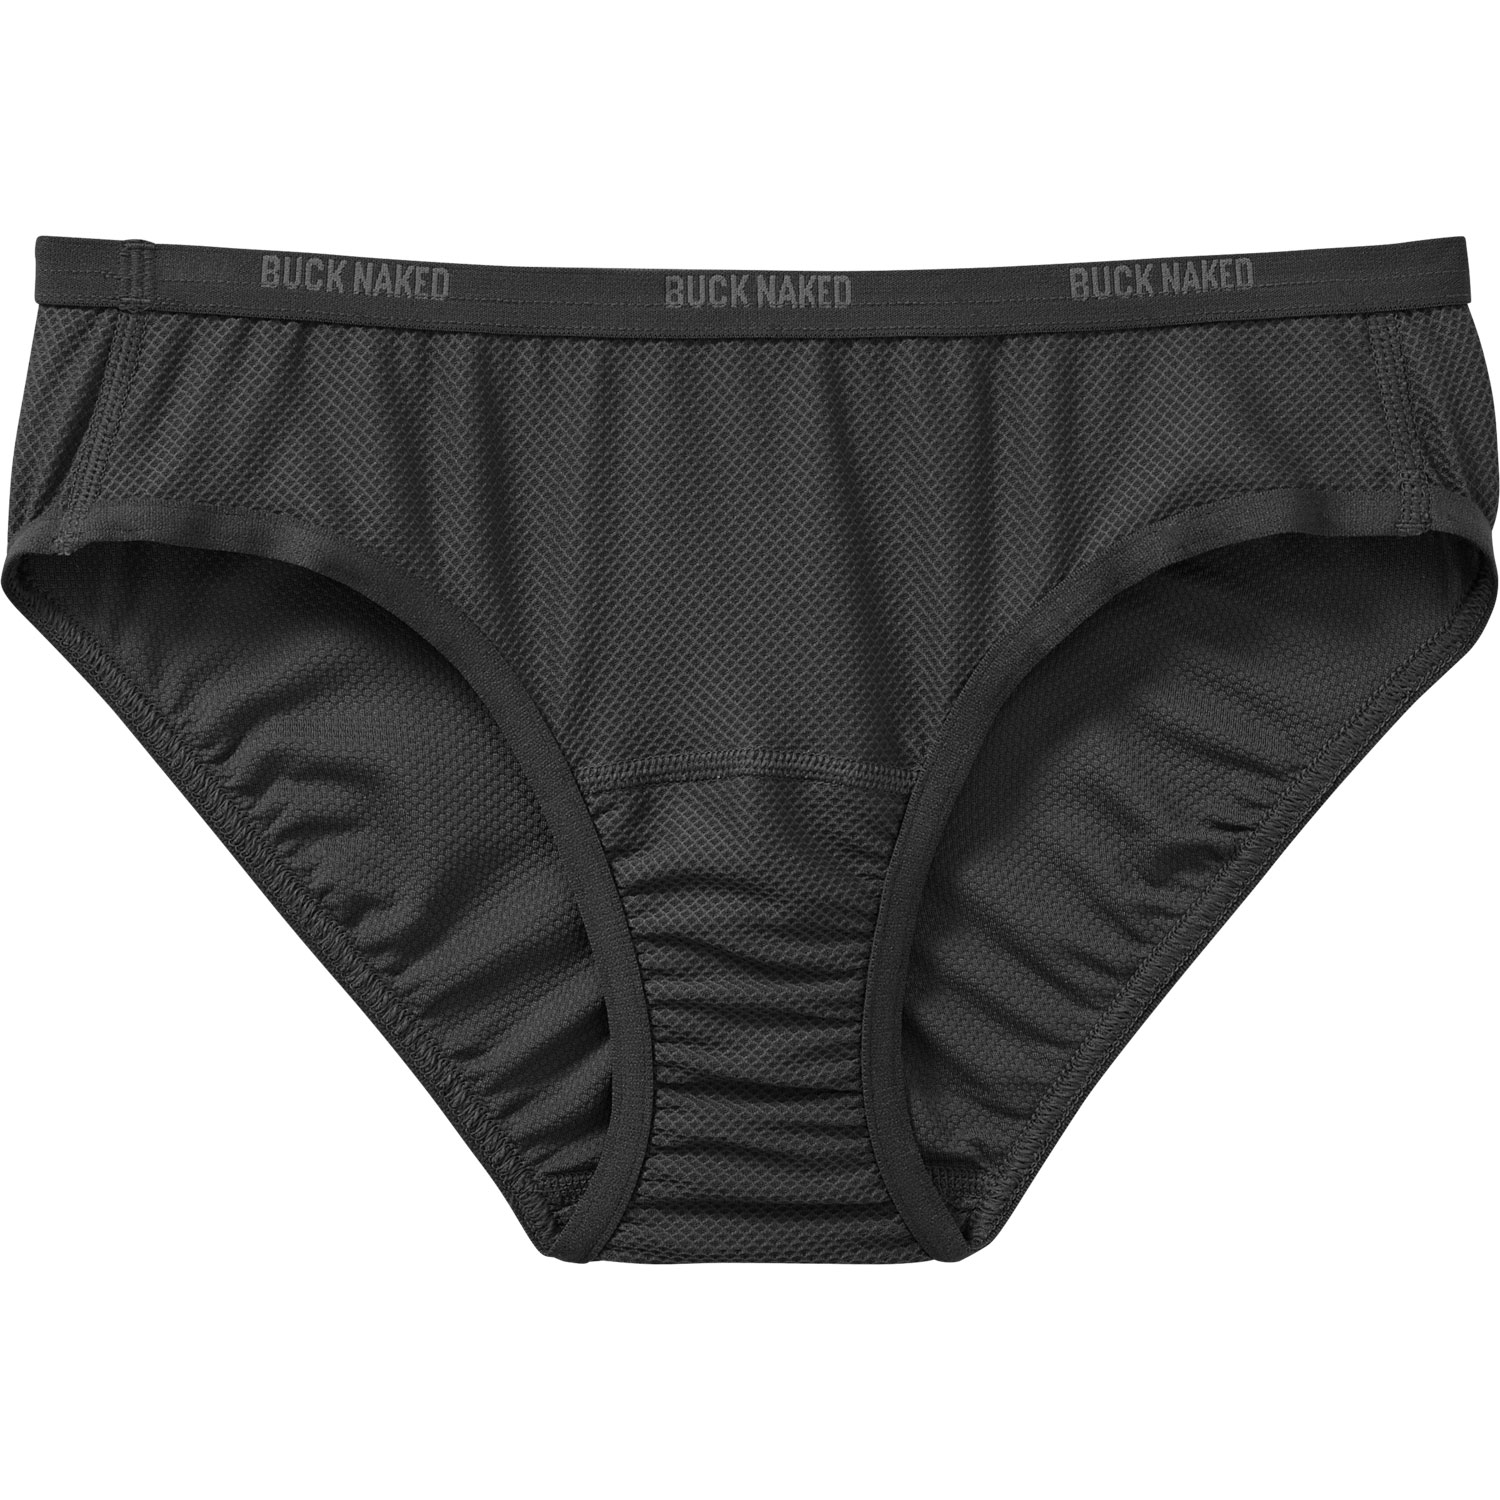 Women's Buck Naked Performance Hipster Underwear | Duluth Trading Company